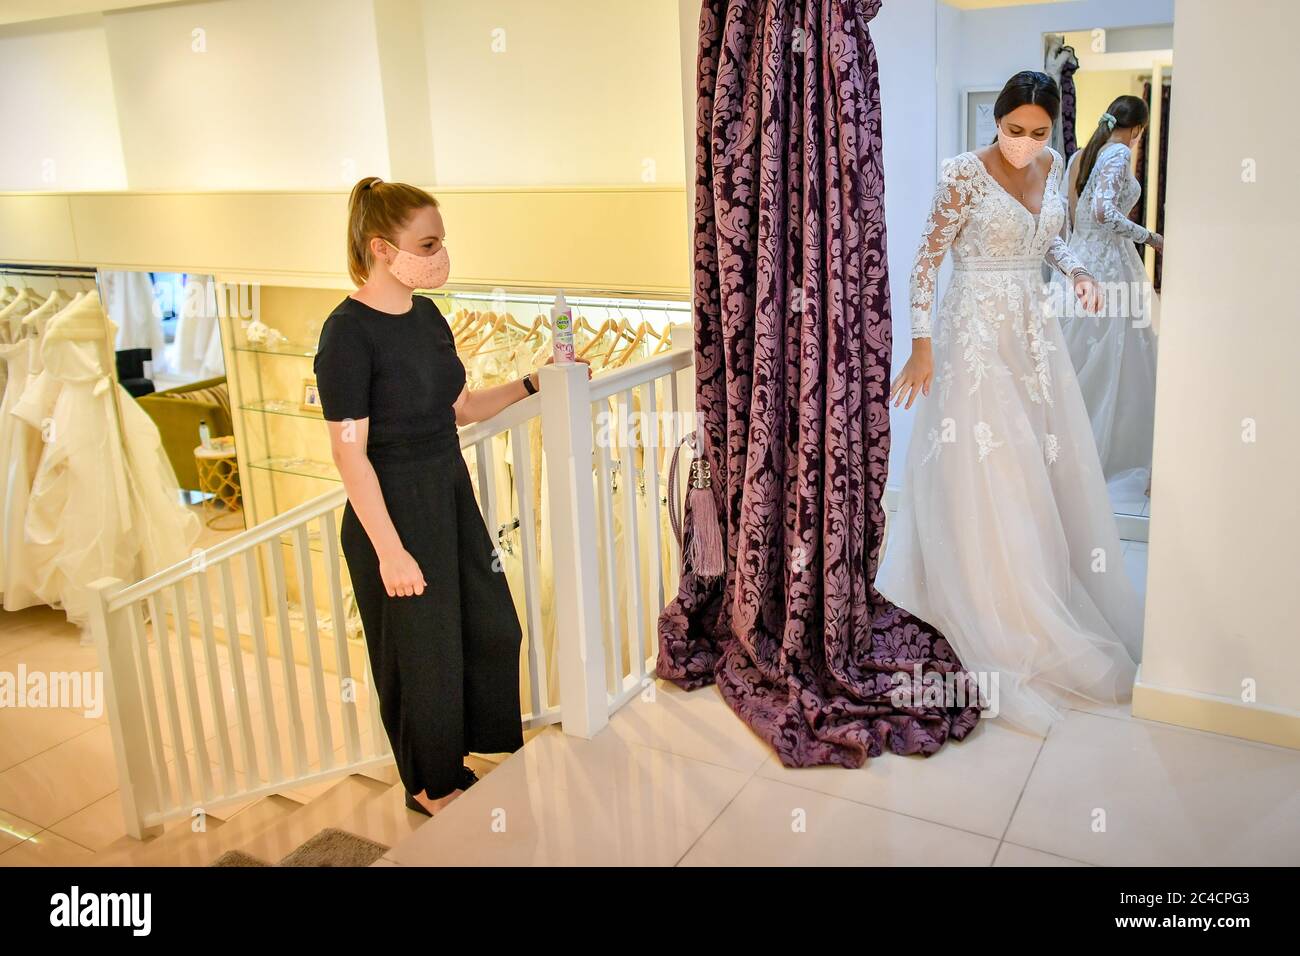 Jessica Letheren exits the fitting room after changing into a wedding dress assisted by bridal consultant Felicity Gray at Allison Jayne Bridalwear in Clifton, Bristol, which has reopened following the lifting of coronavirus lockdown restrictions, with measures put in place to prevent the spread of coronavirus during brides' dress fittings. Stock Photo